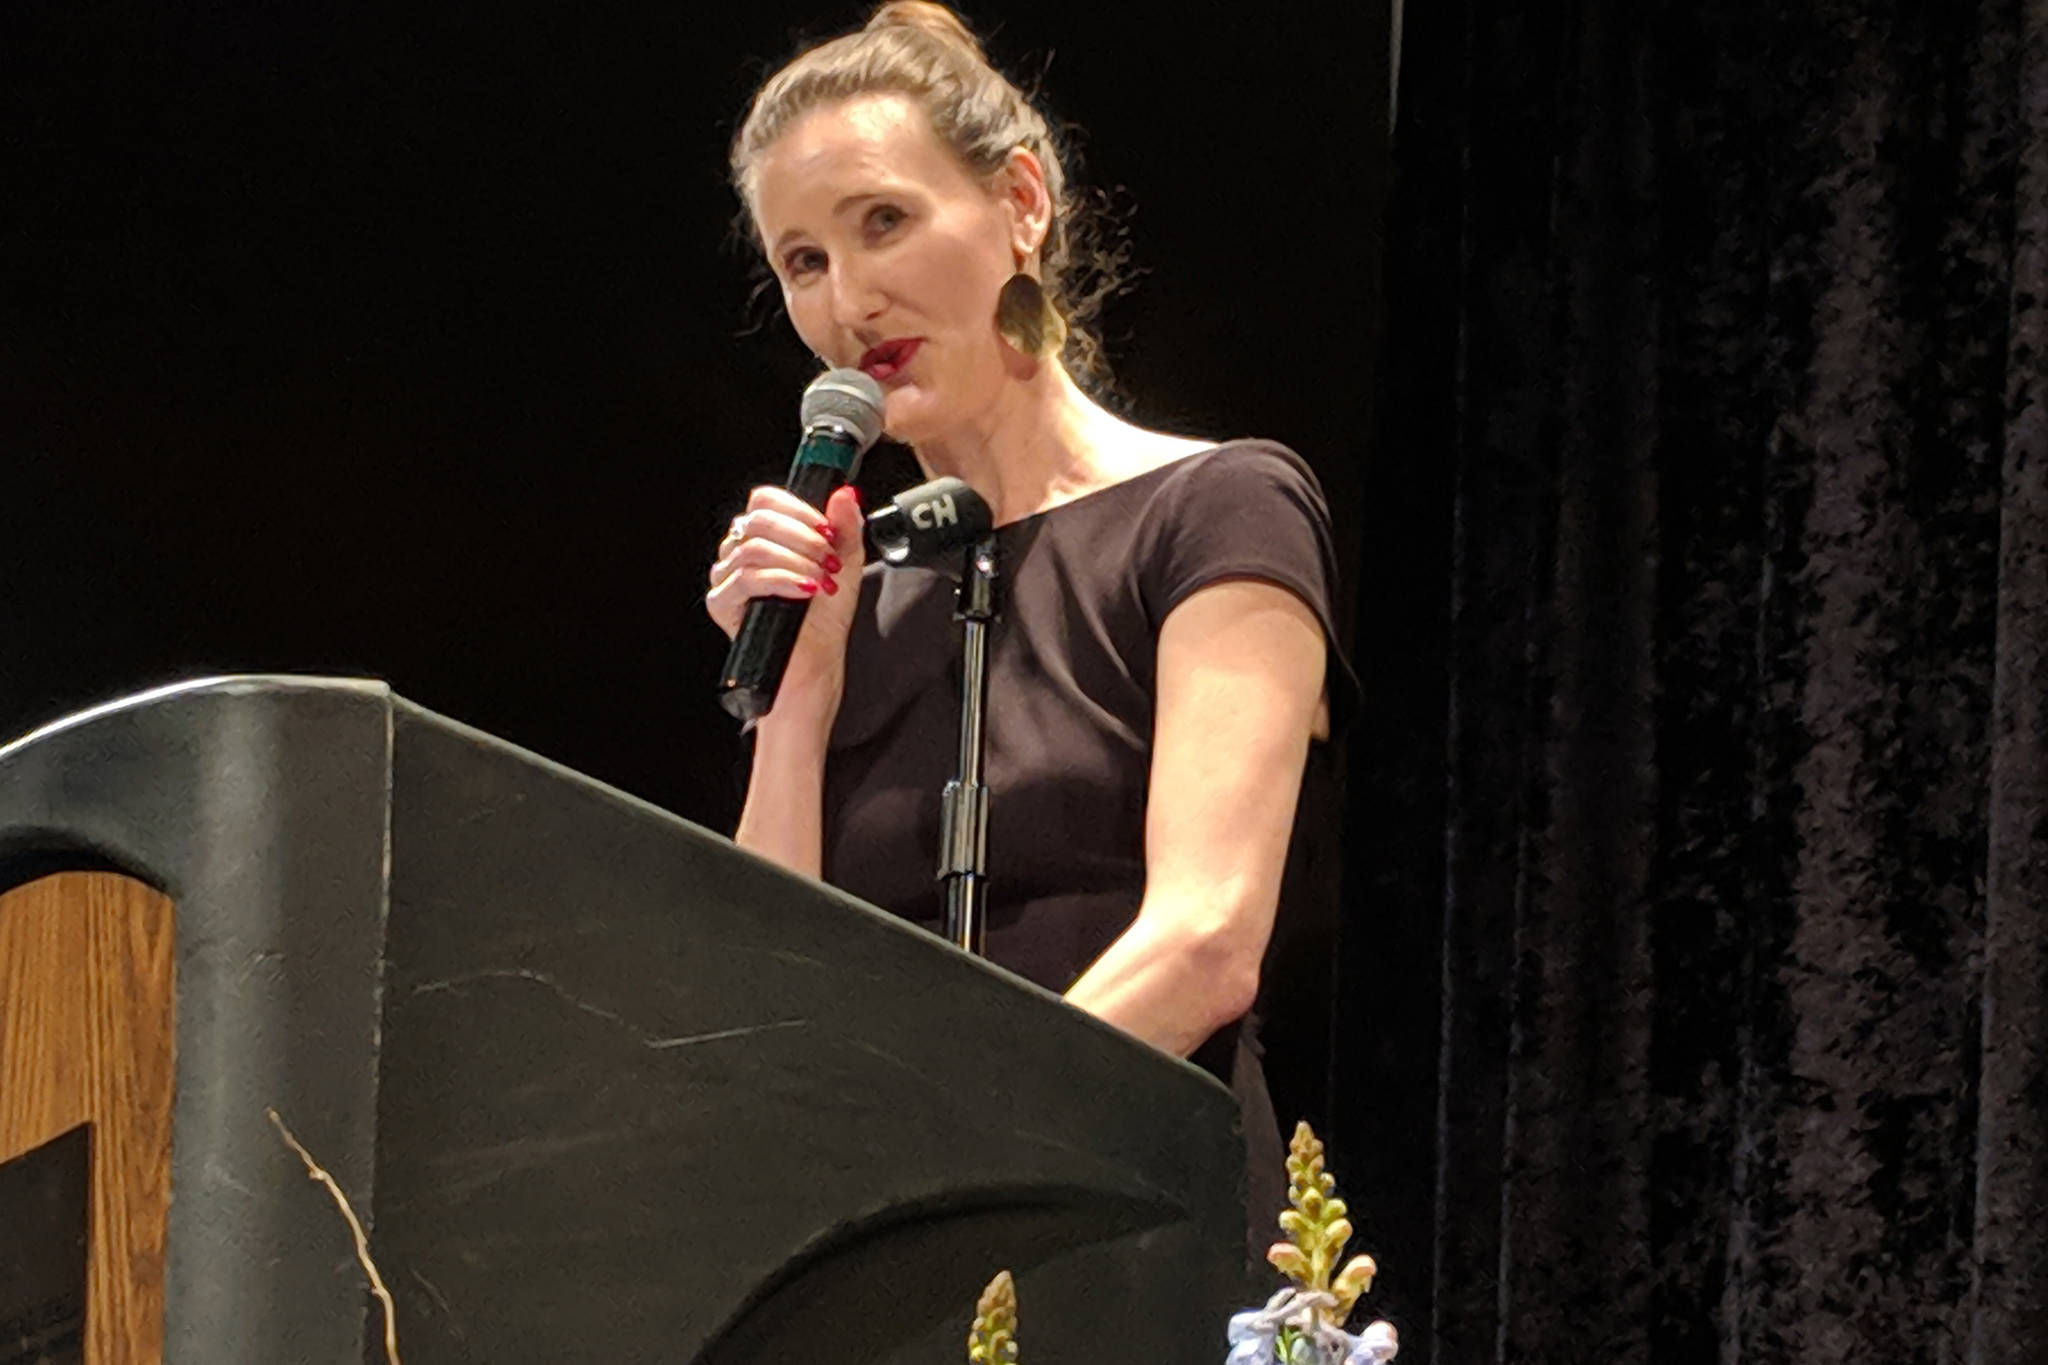 Jorden Nigro speaks during the Woman of Distinction 2019 Celebration Saturday, March 9, 2019 at Centennial Hall. During her speech she advocated for seeing humanity in others and the value of showing up. (Ben Hohenstatt | Capital City Weekly)